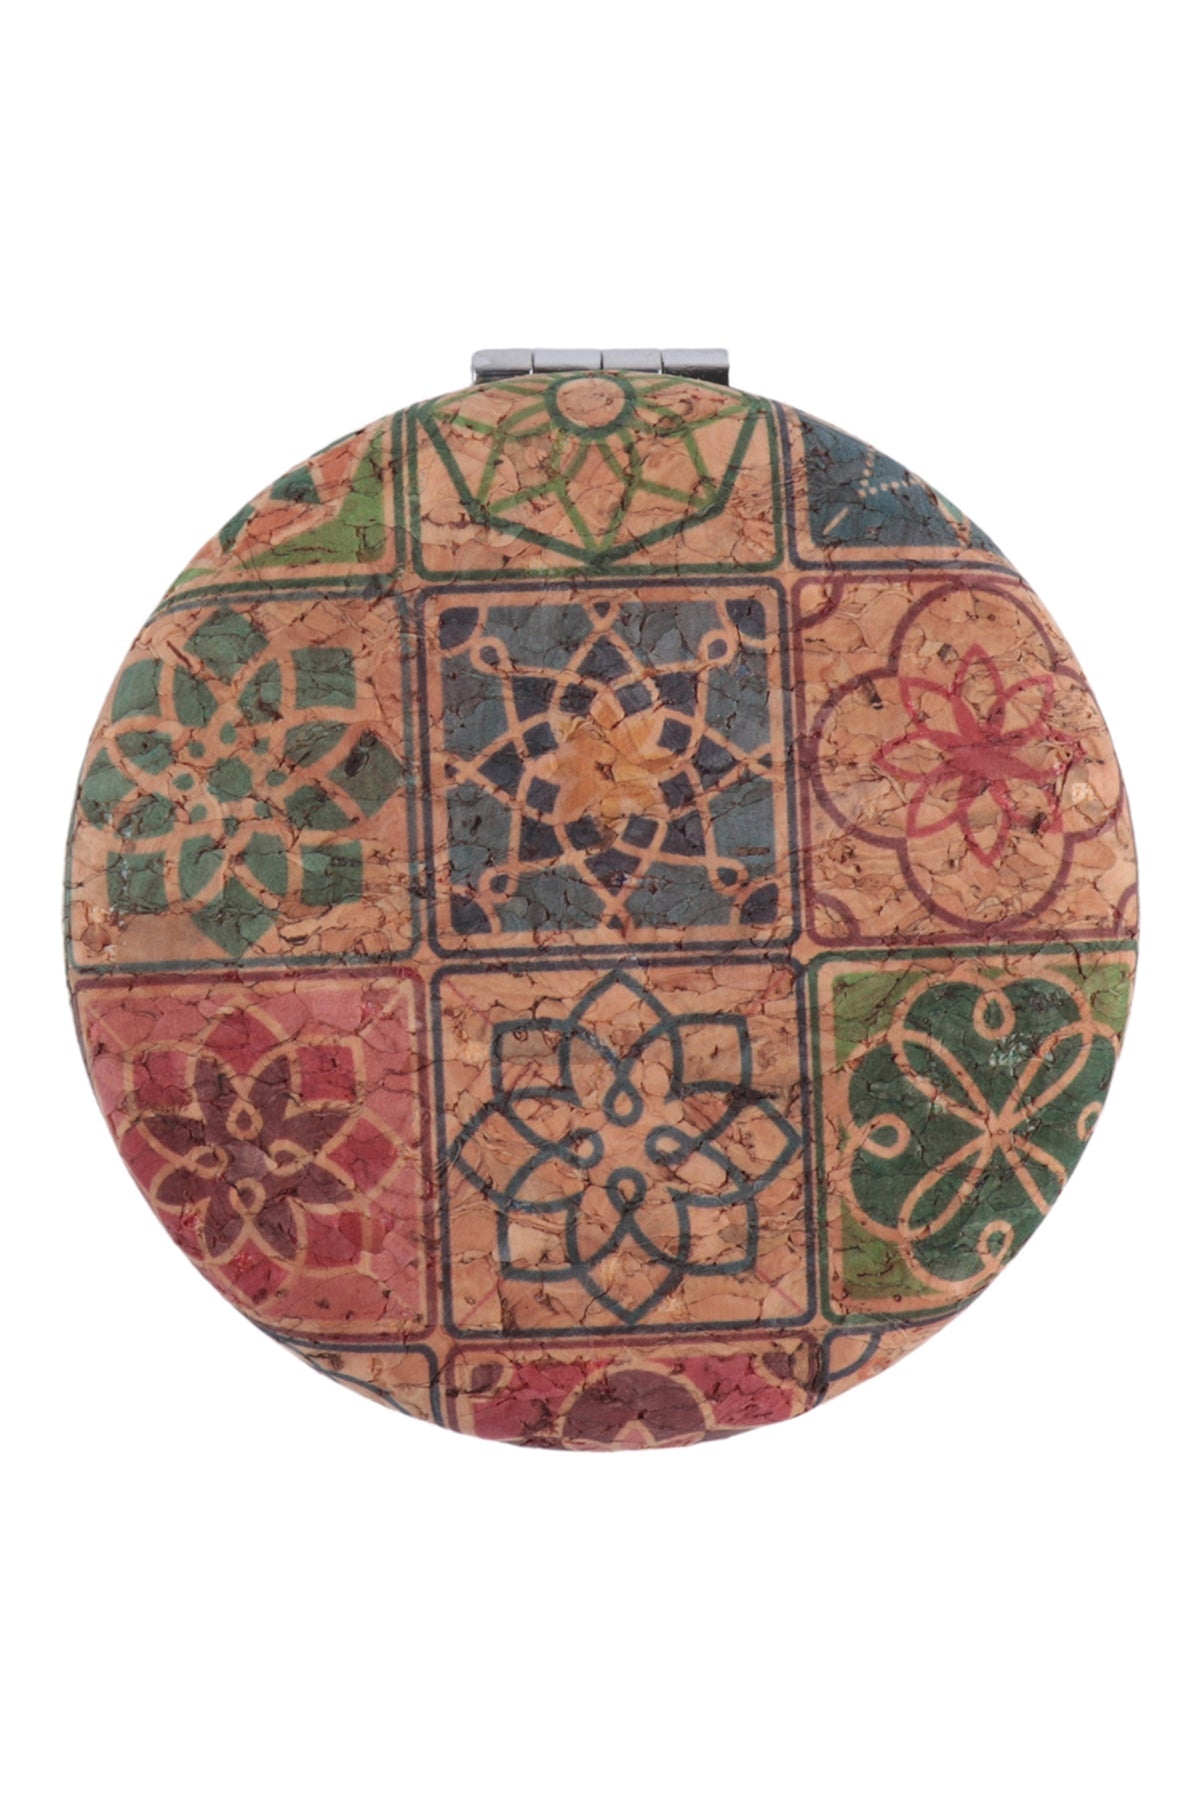 COMPACT MIRROR MORROCAN ACCENT